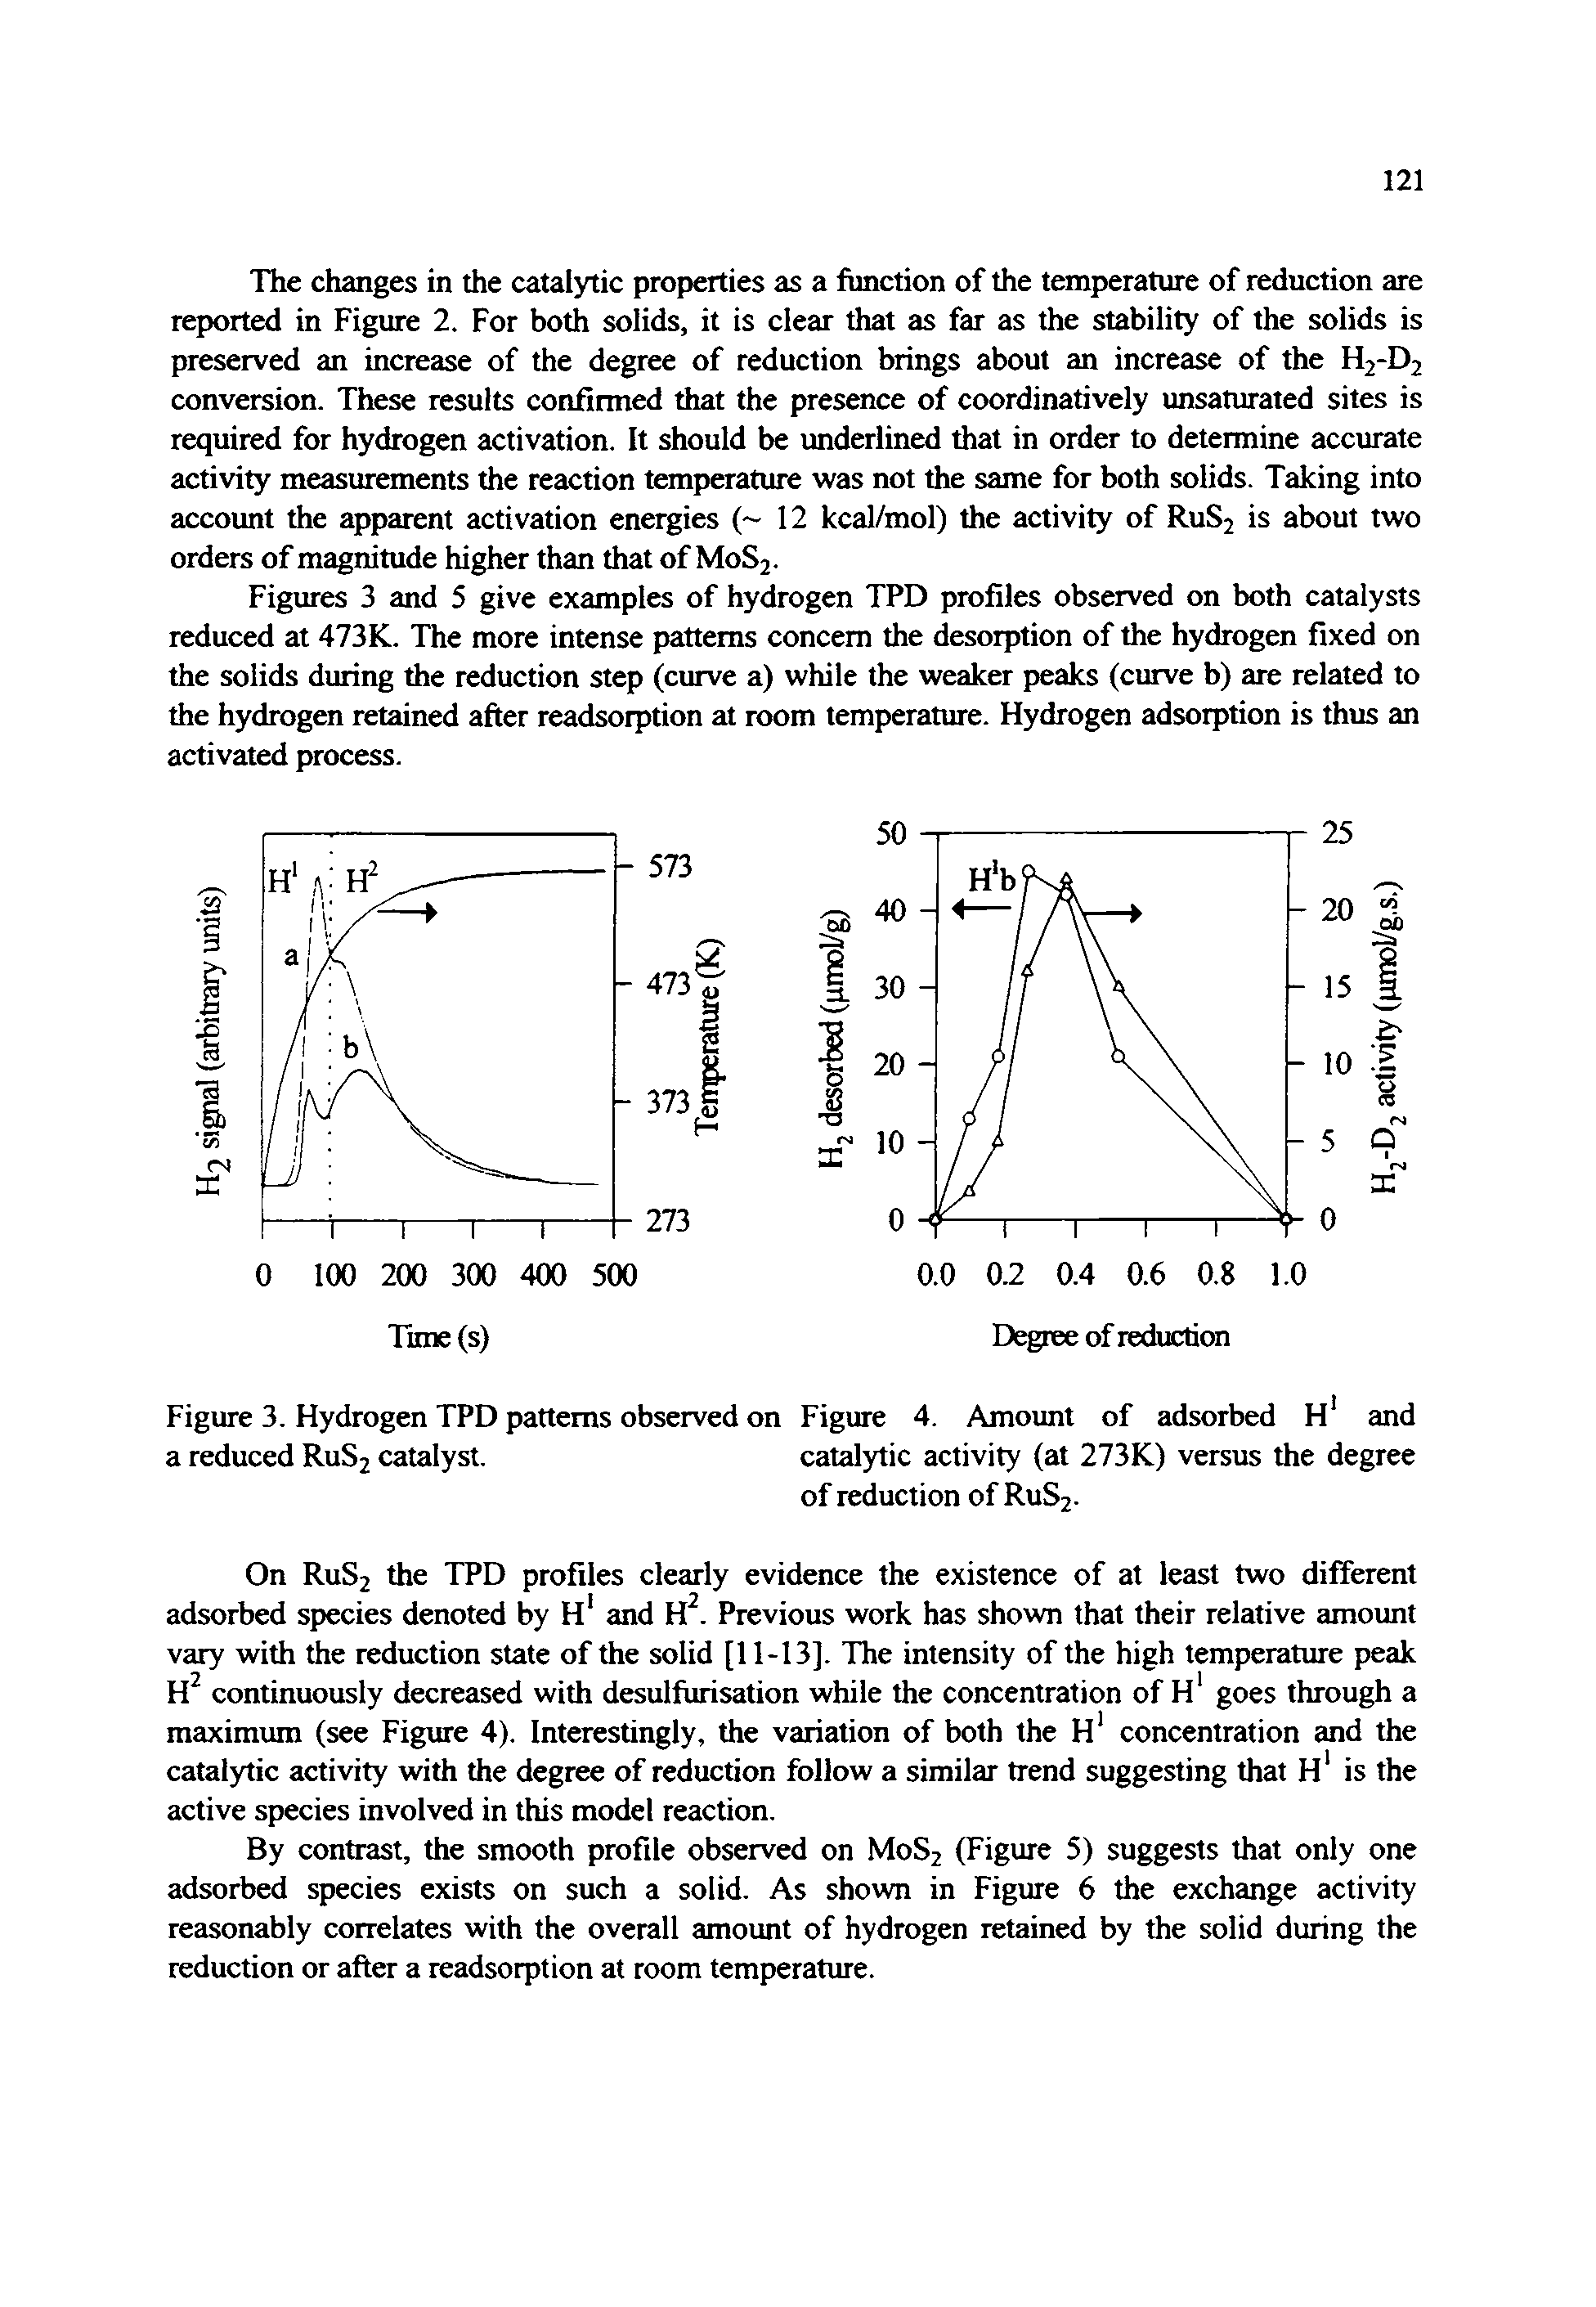 Figures 3 and 5 give examples of hydrogen TPD profiles observed on both catalysts reduced at 473K. The more intense patterns concern the desorption of the hydrogen fixed on the solids during the reduction step (curve a) while the weaker peaks (curve b) are related to the hydrogen retained after readsorption at room temperature. Hydrogen adsorption is thus an activated process.